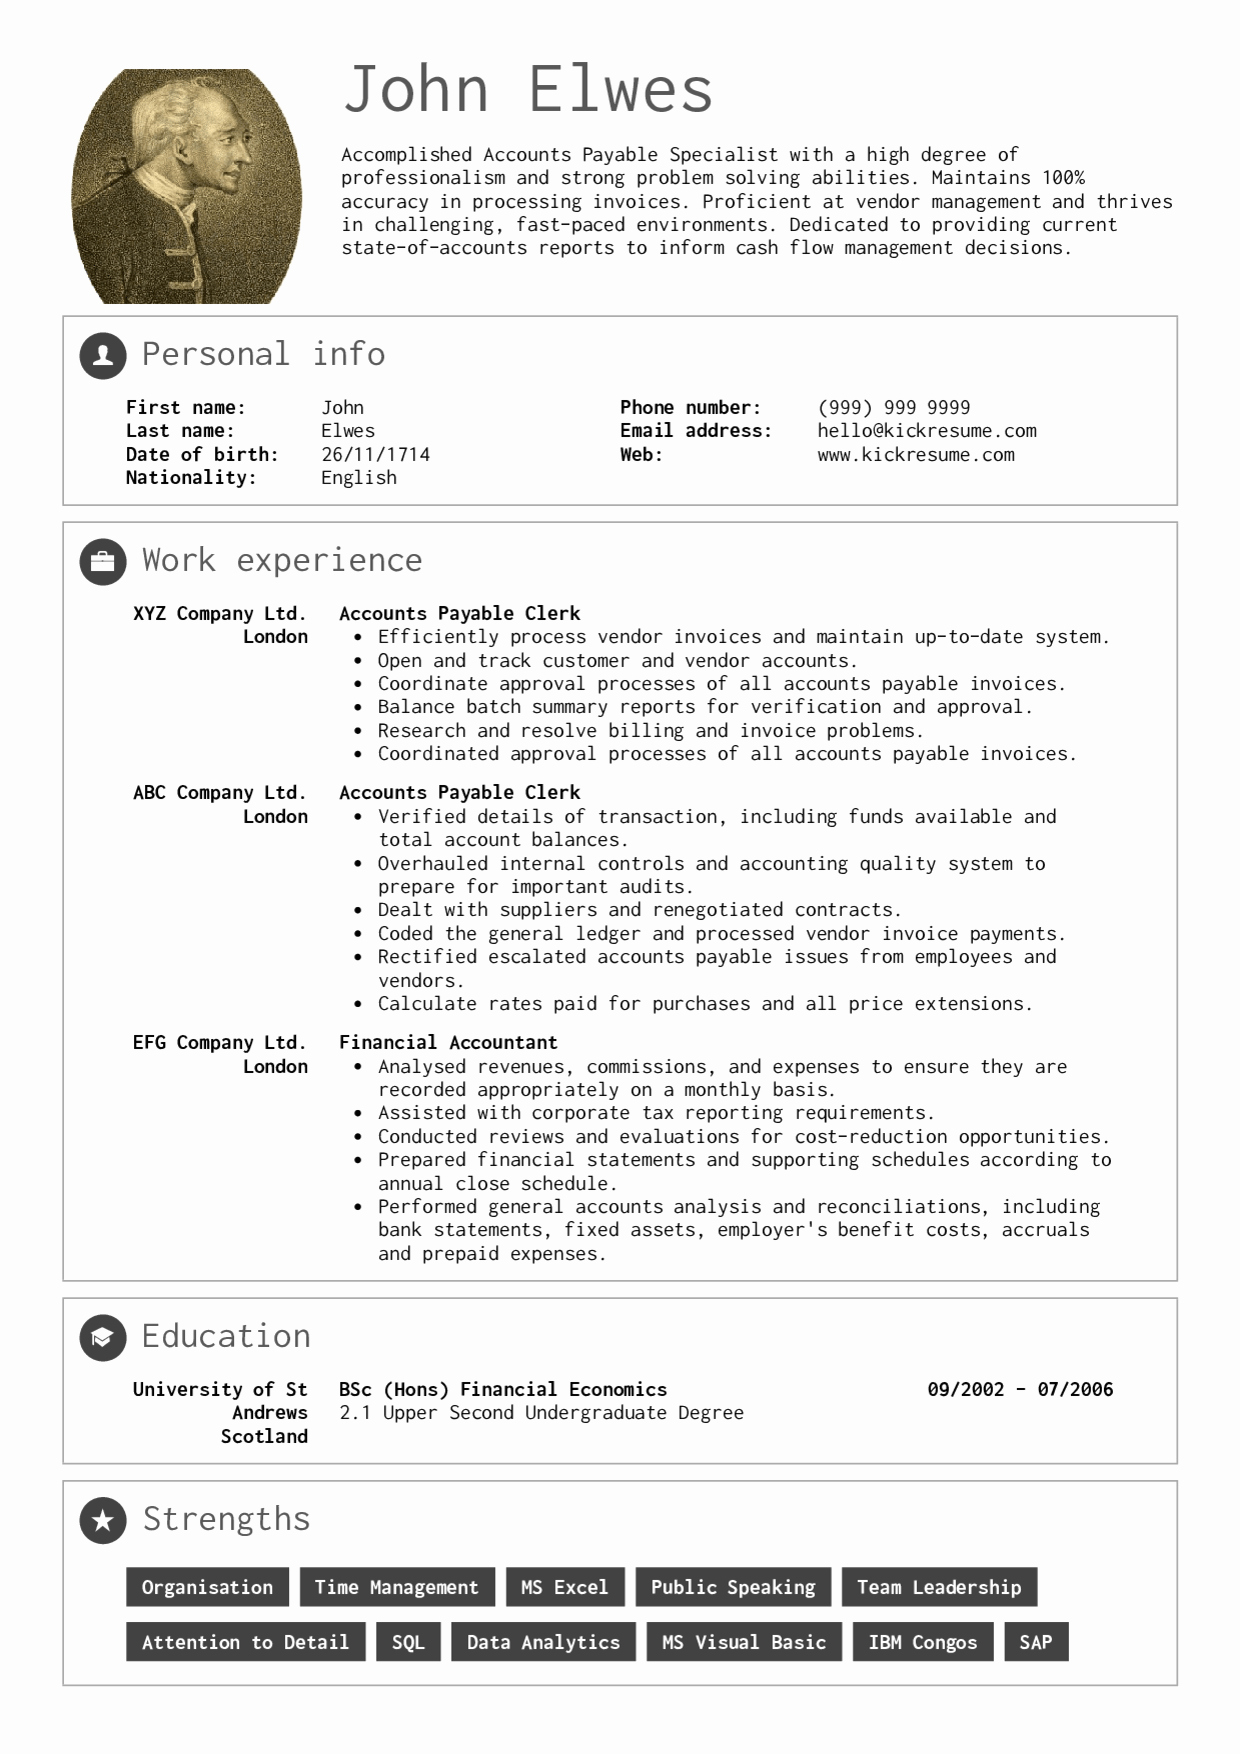 Staff Accountant Resume Summary Beautiful Resume Examples by Real People Senior Accountant Resume